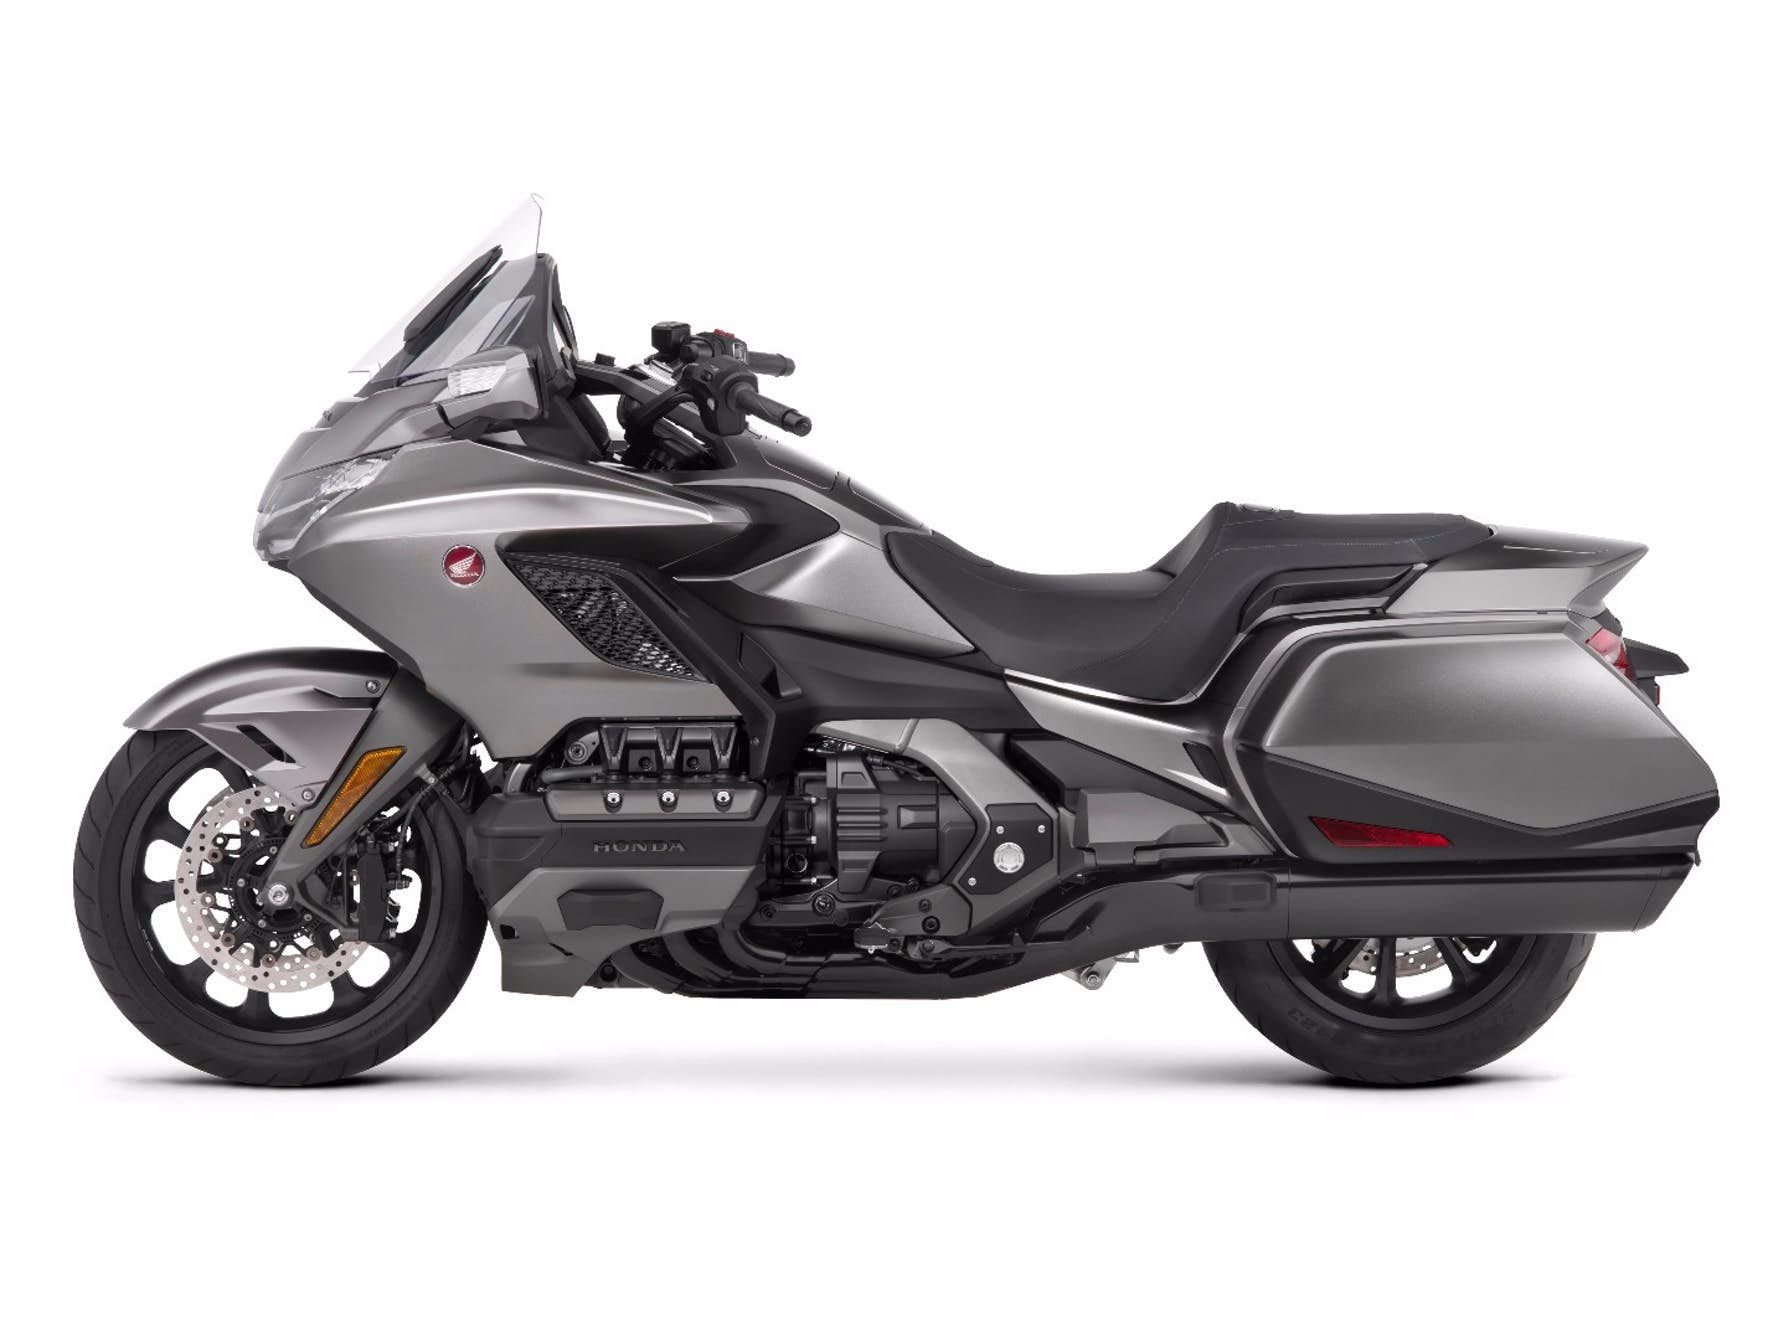 Honda Goldwing Gl1800 Price in Pakistan, Images, and Color Options!